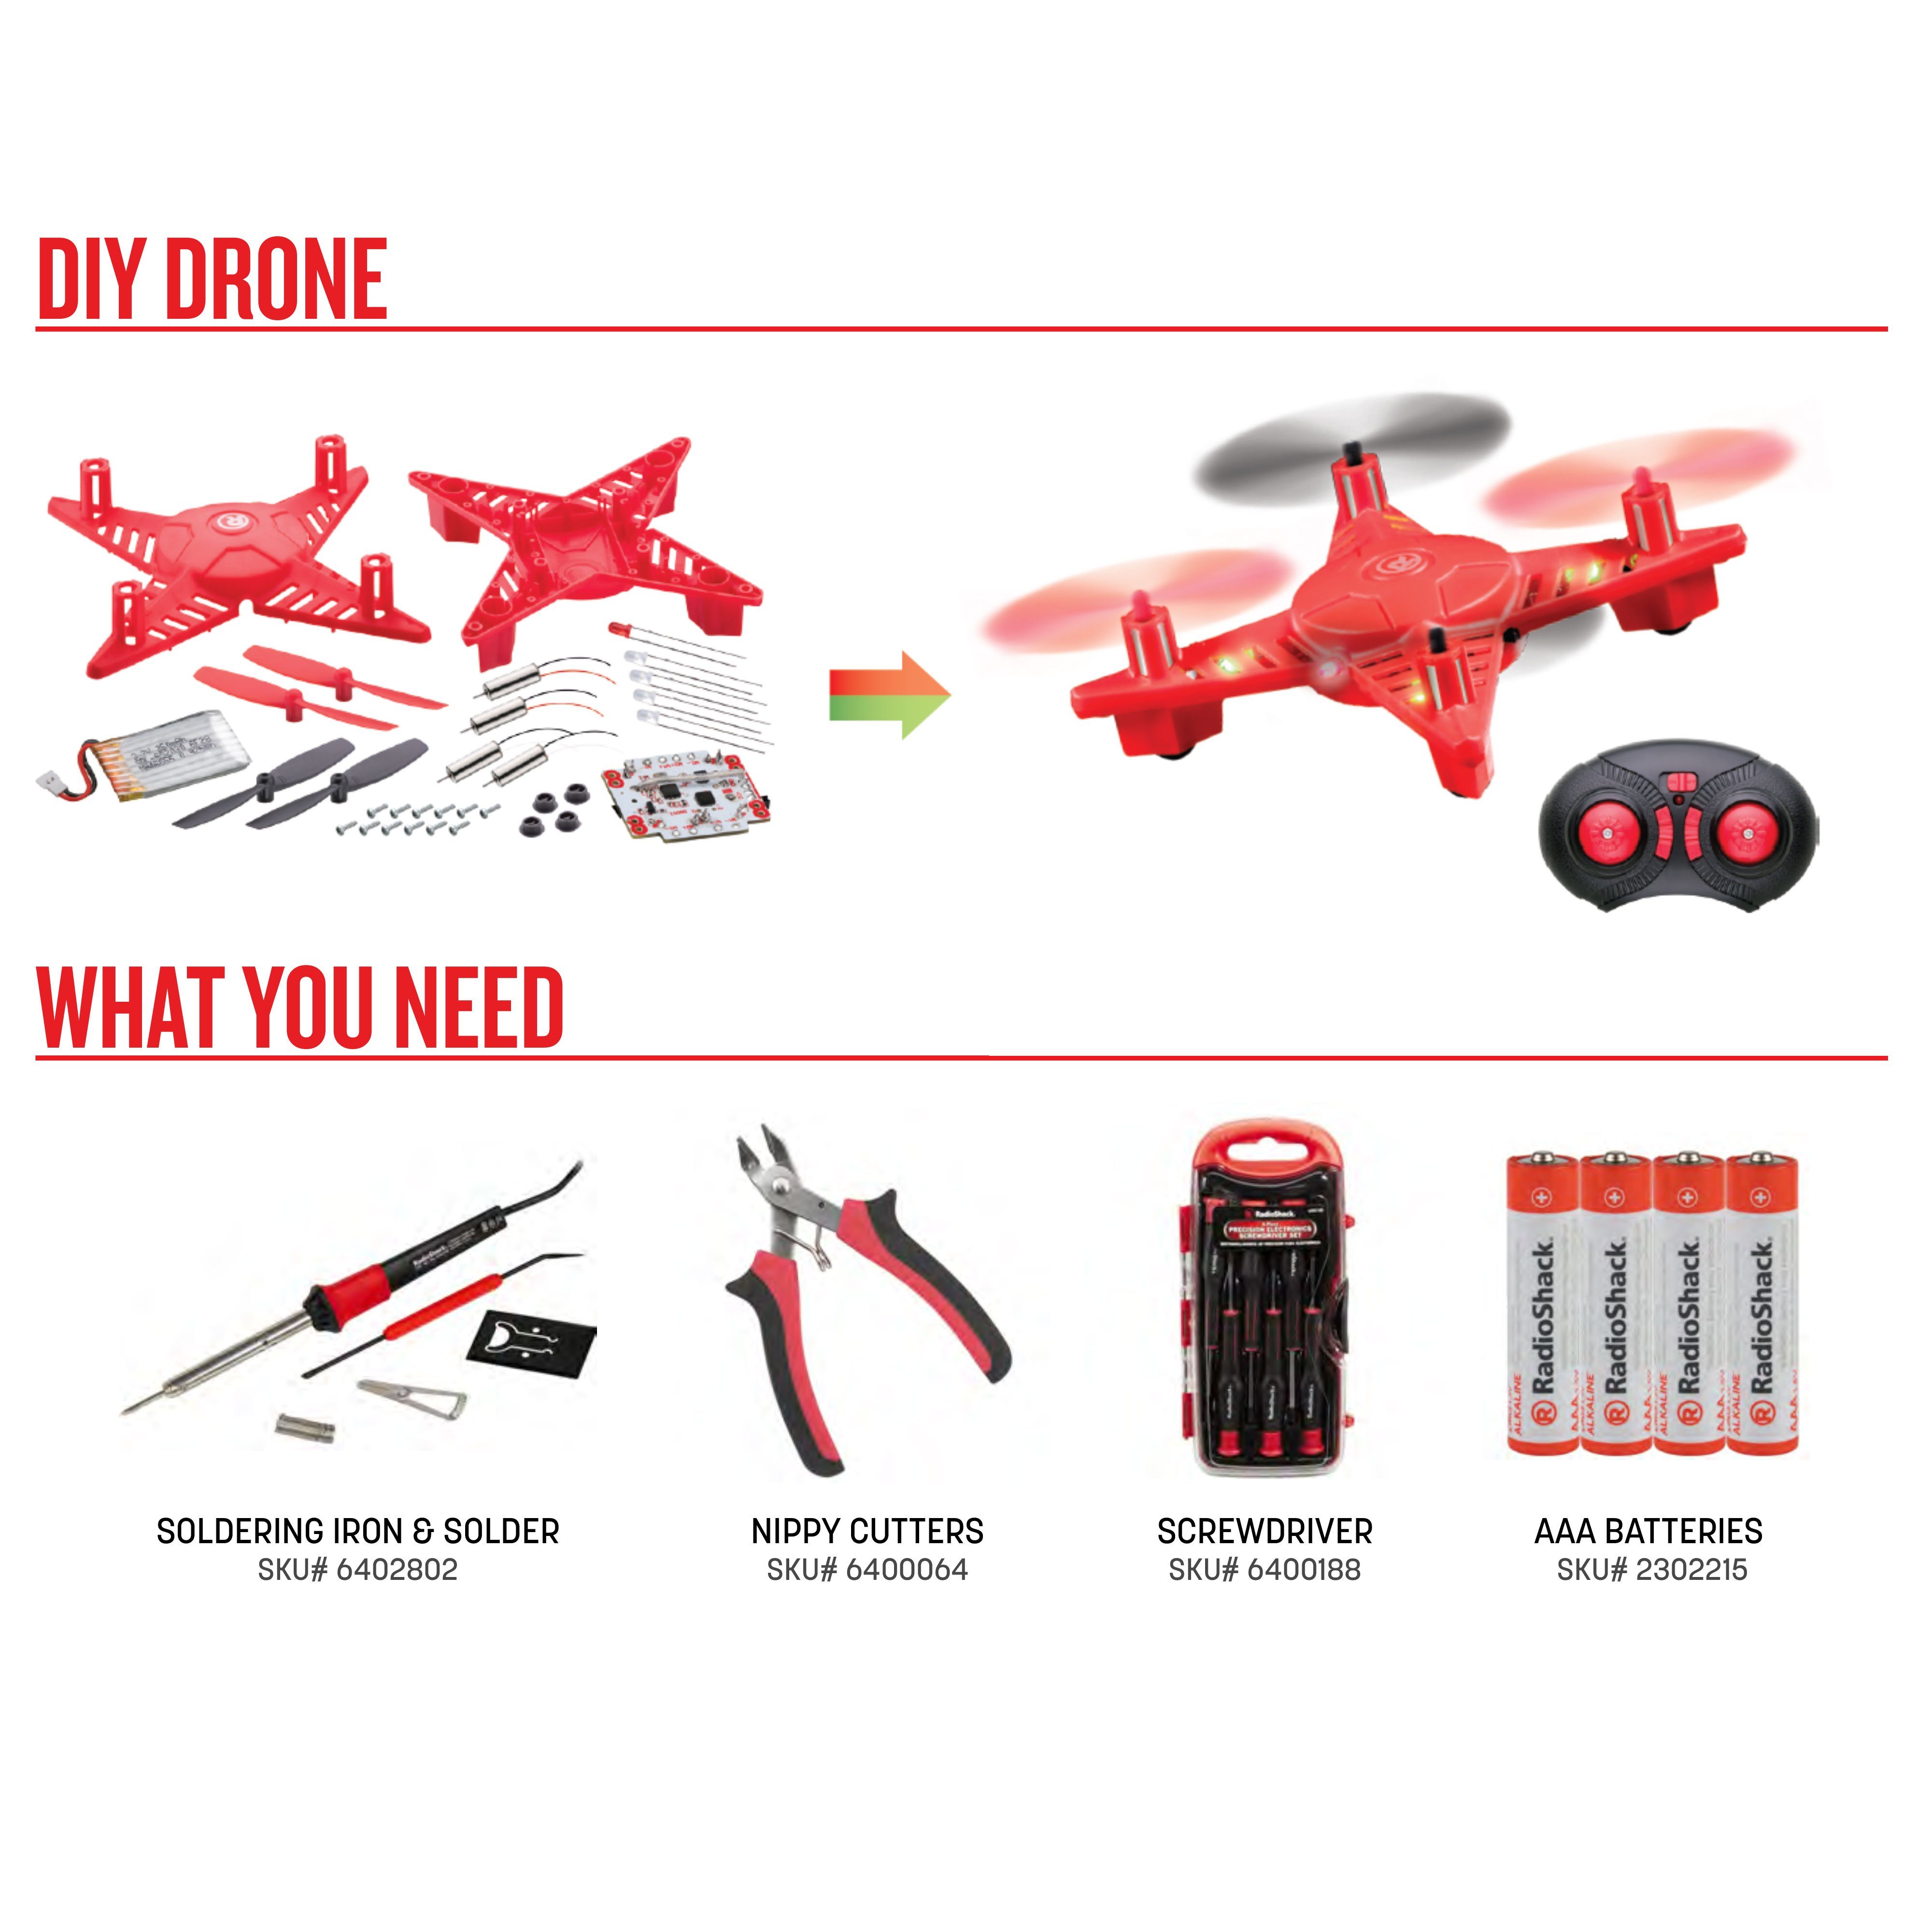 Image of DIY Drone Bundle with Tools and Batteries